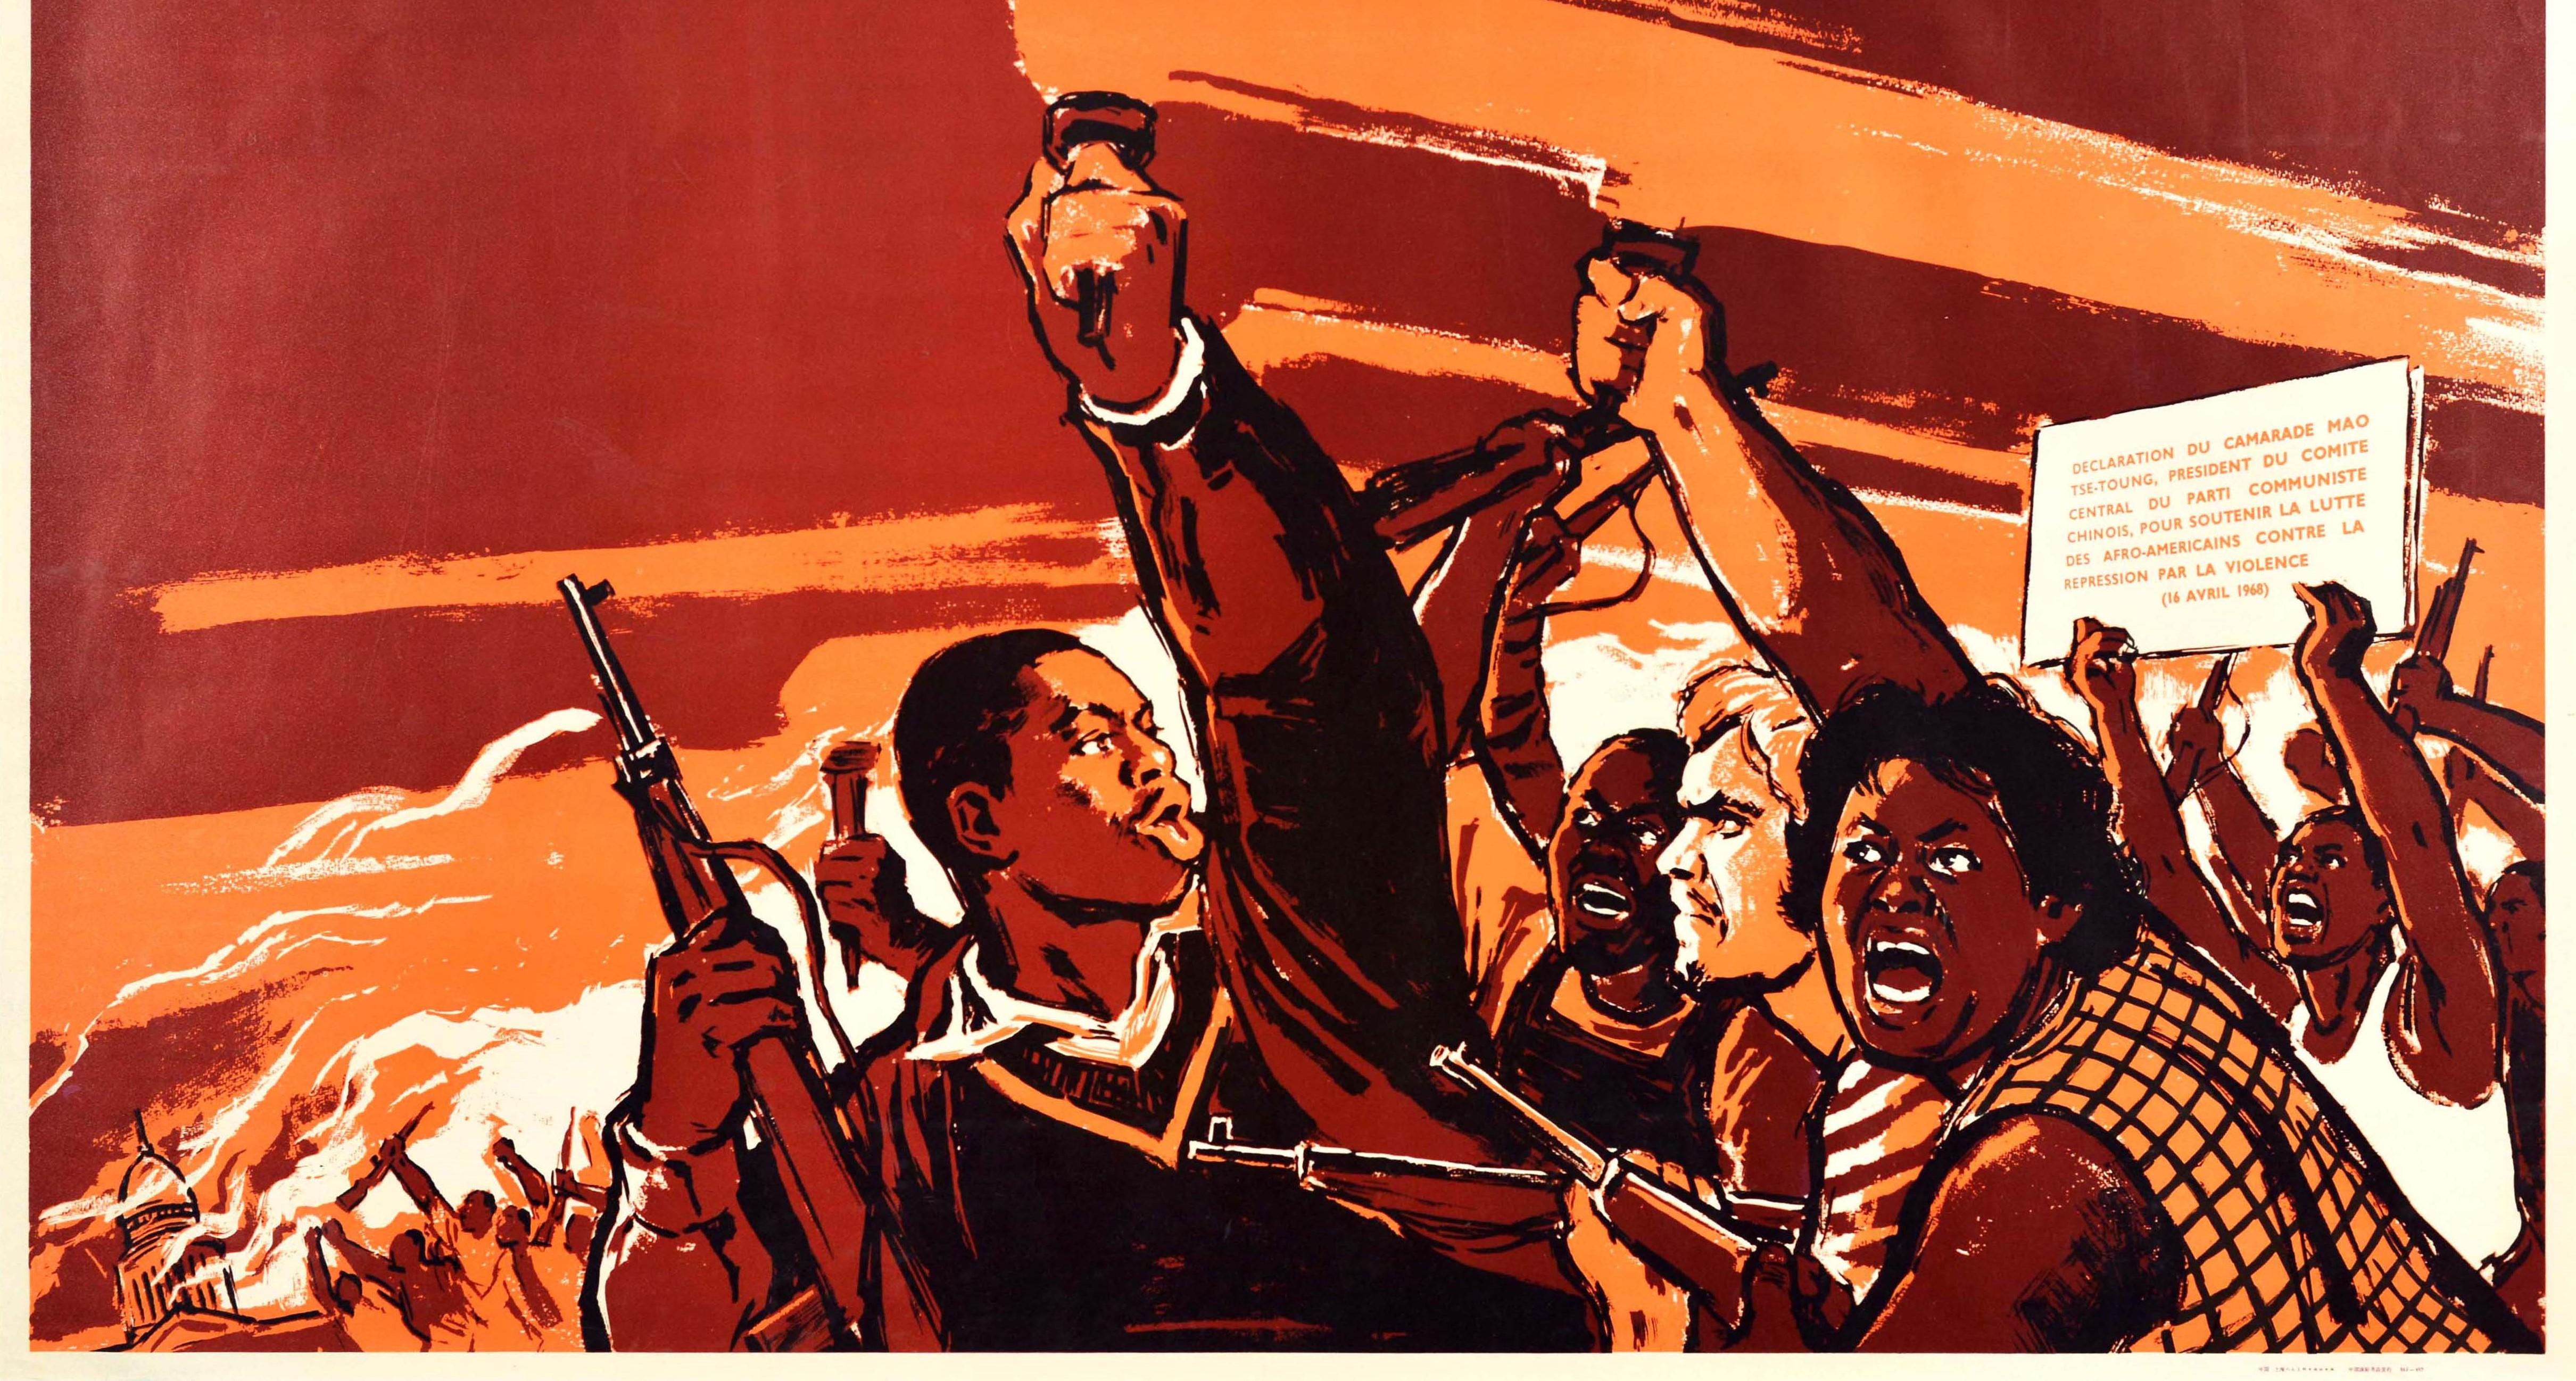 Original vintage Chinese propaganda poster against colonial imperialism featuring a dynamic illustration of emotionally charged people striding forward armed with rifle guns and holding up flaming fire red torches against a red and orange background